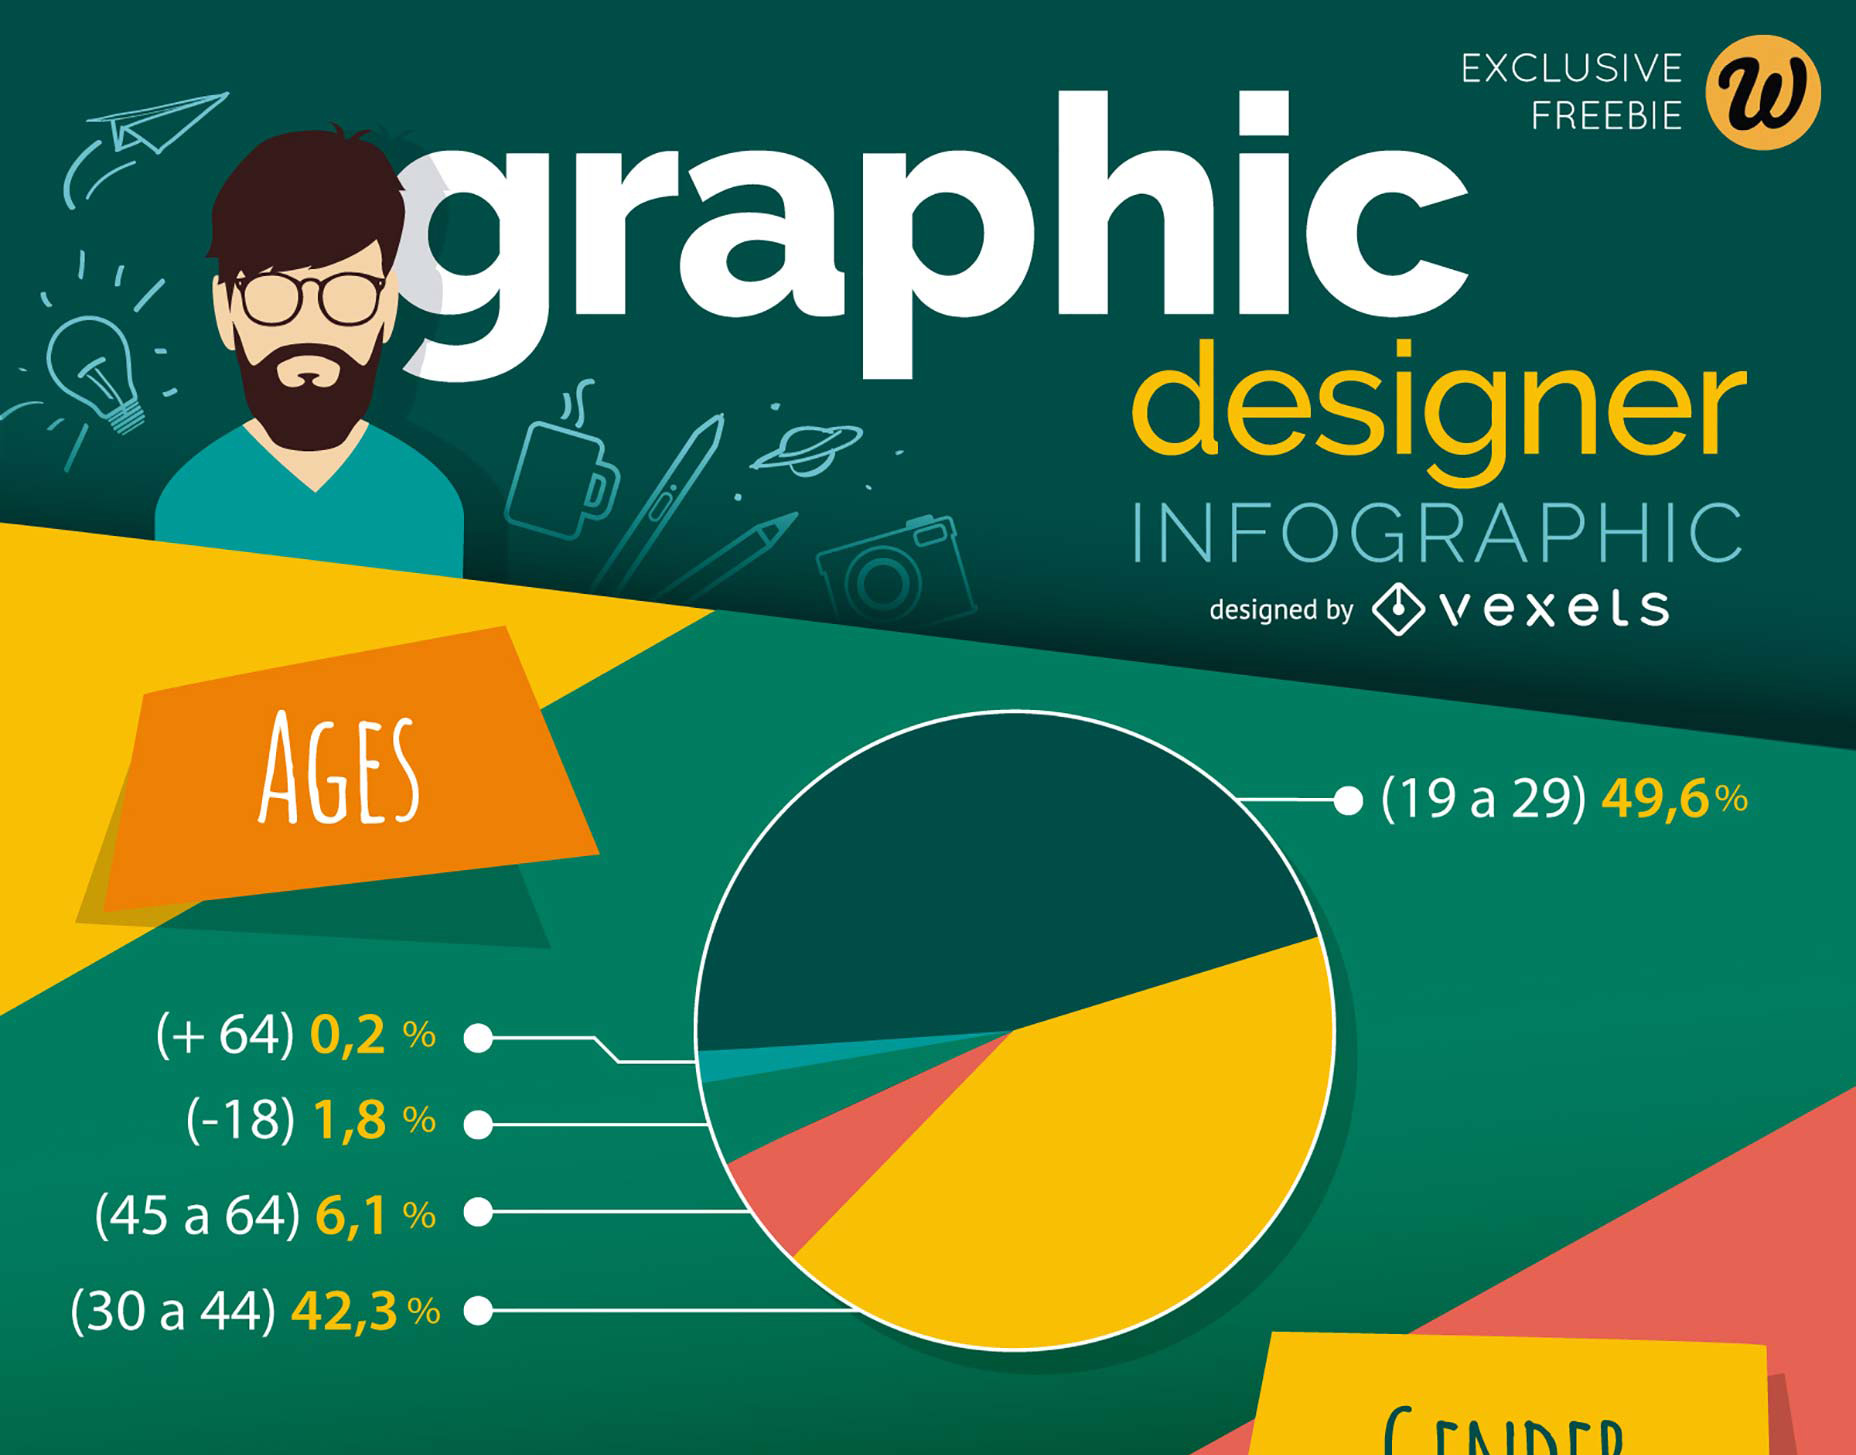 Web Design Trends to Expect This 2016 [Infographic] | Visual.ly